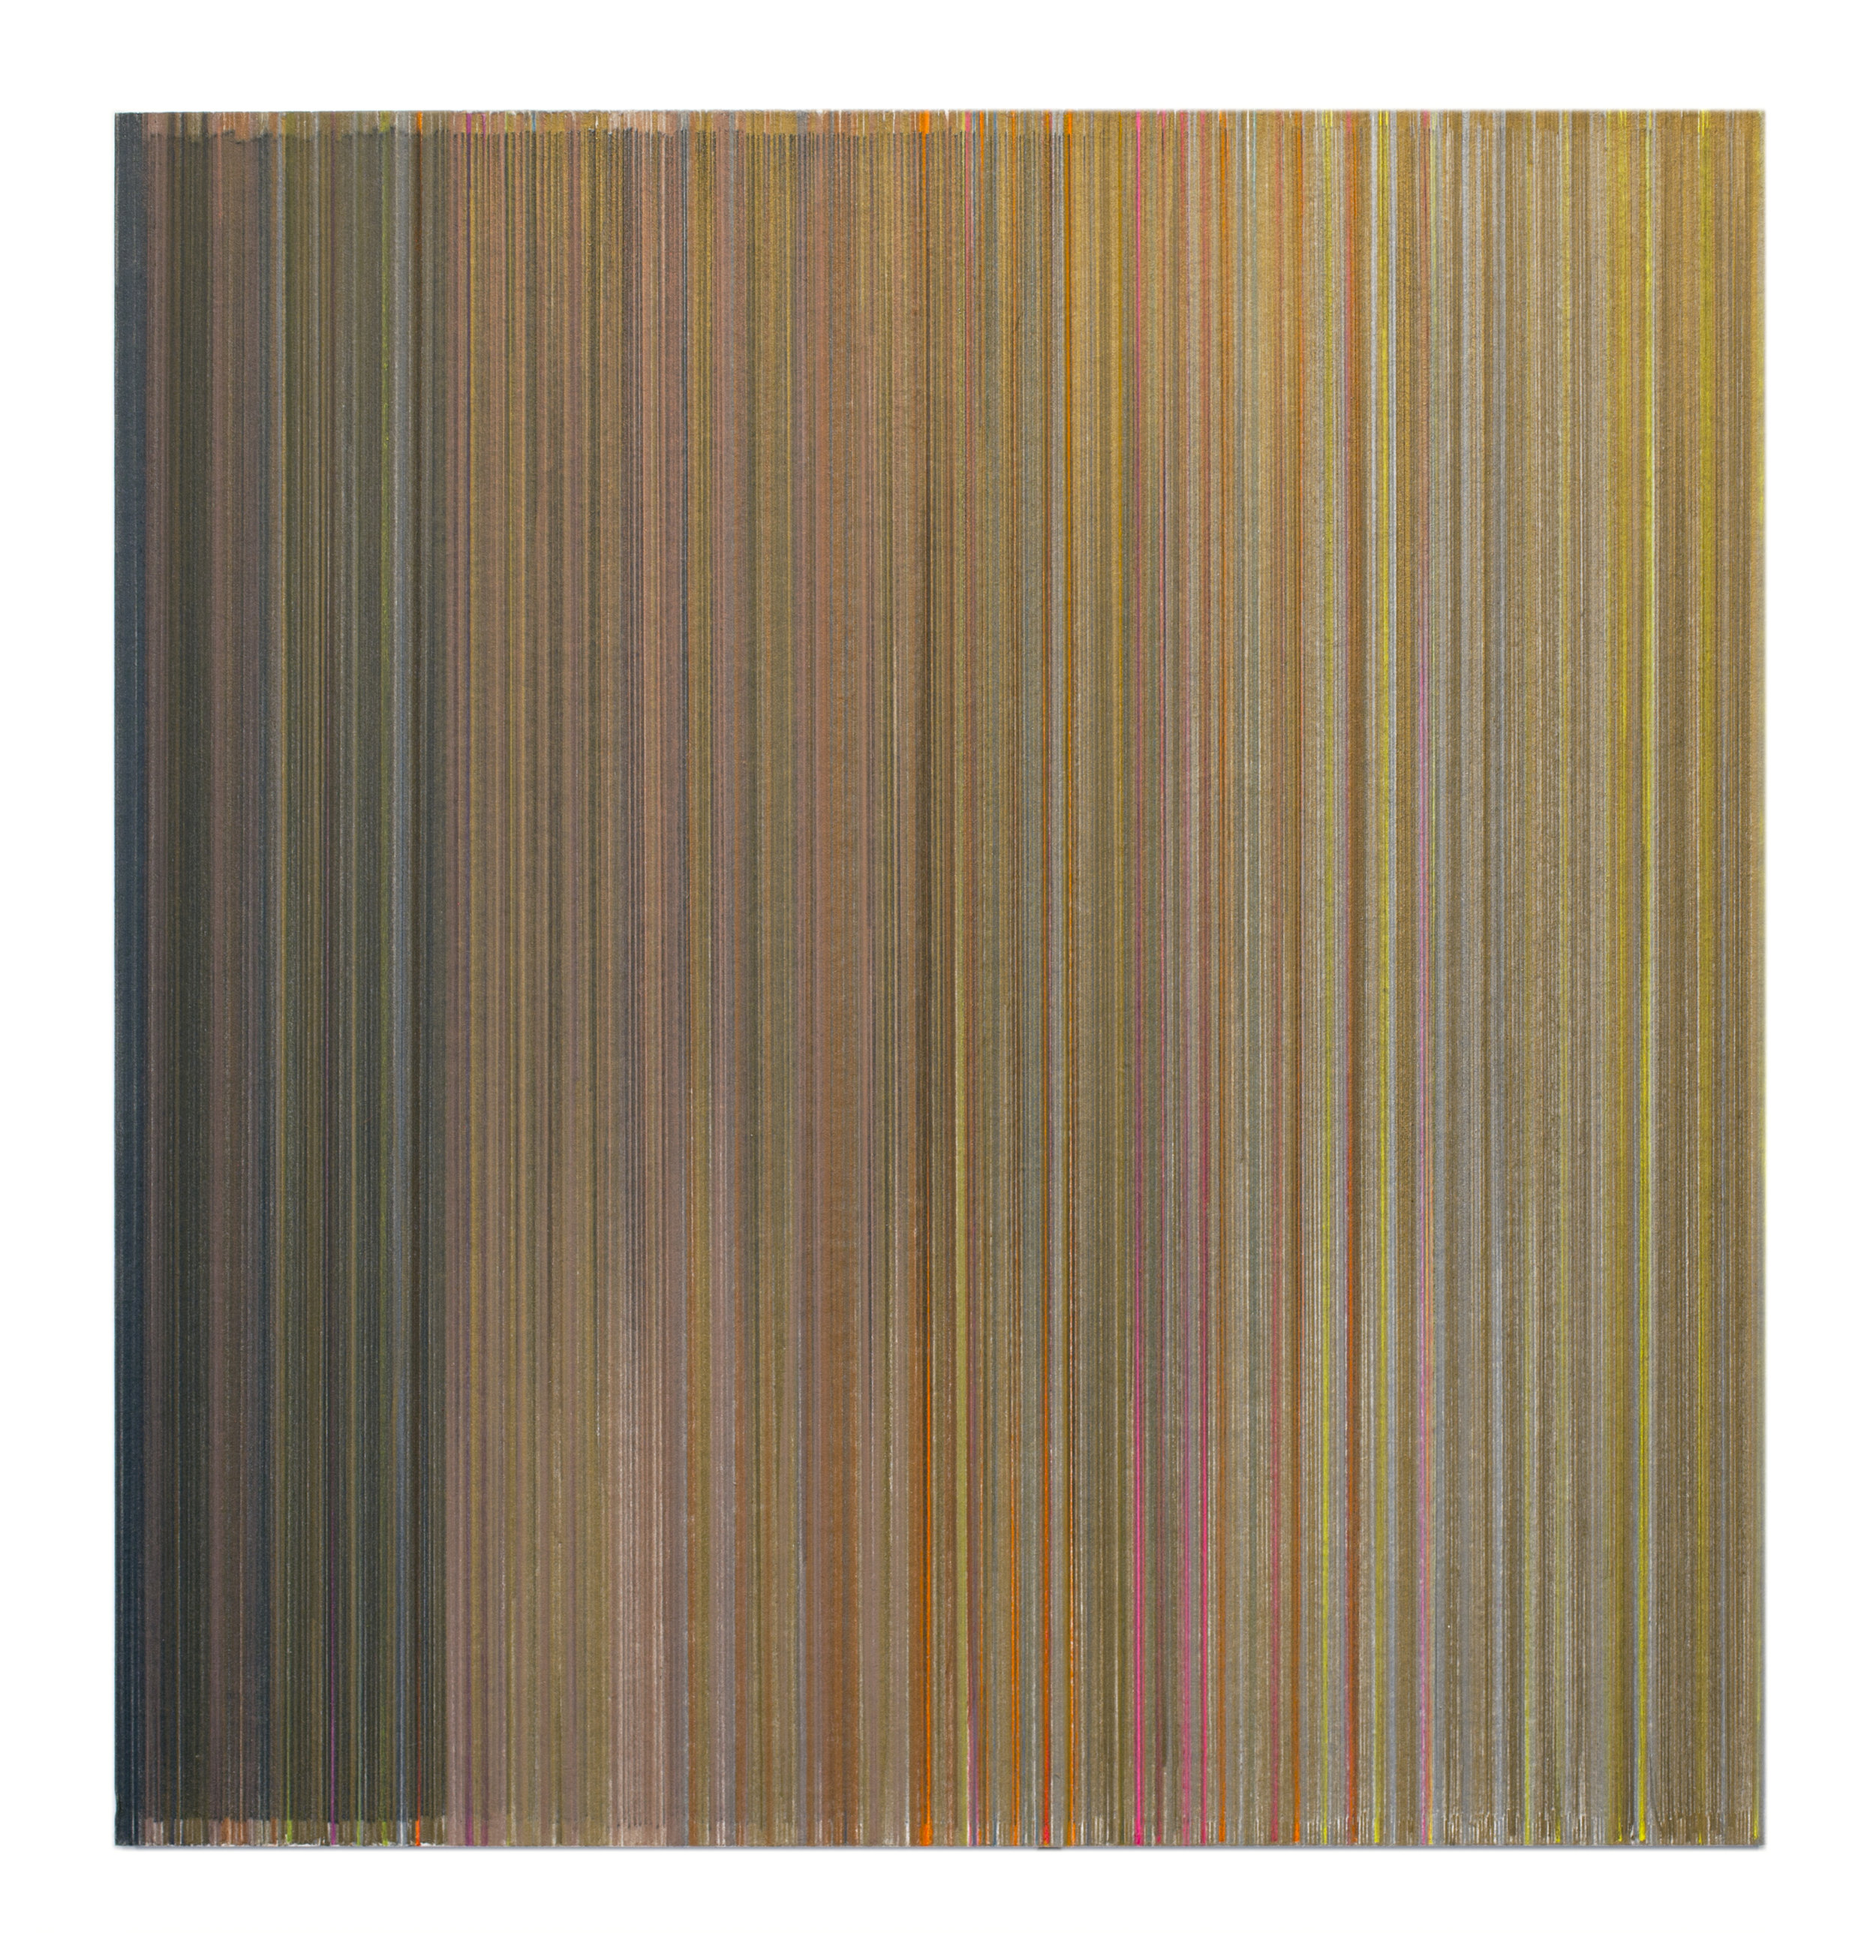    then this   2017 graphite and colored pencil on mat board 18 x 19 inches title from poem by Alice Oswald  Tithonus 46 minutes in the life of the Dawn  from  Falling Awake , 2016, W.W. Norton &amp; Company 